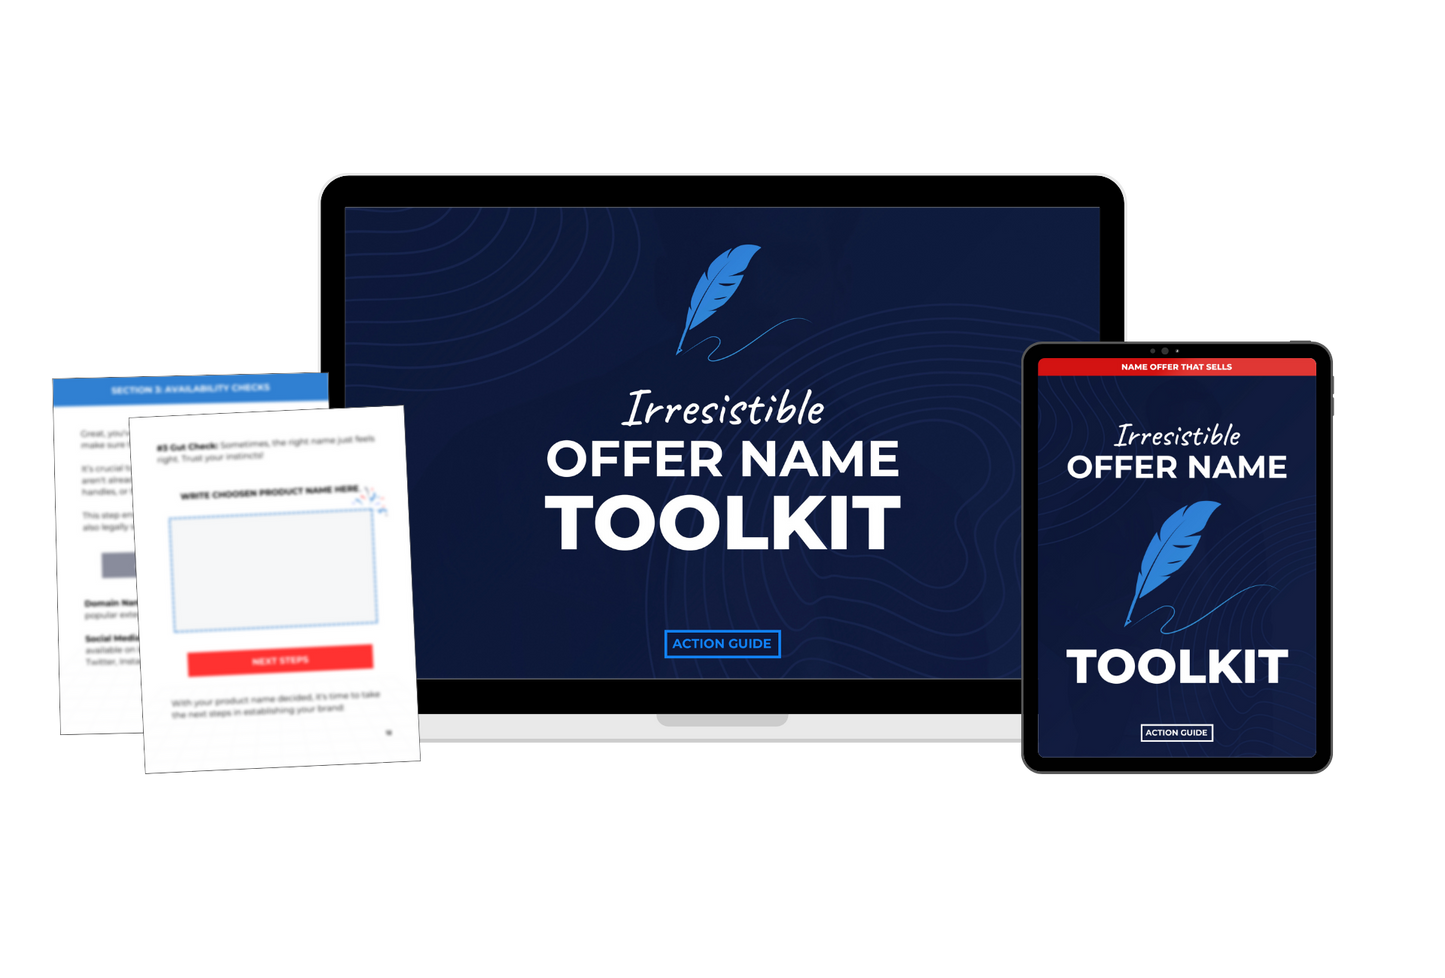 Irresistible Offer Name Toolkit (Action Guide)